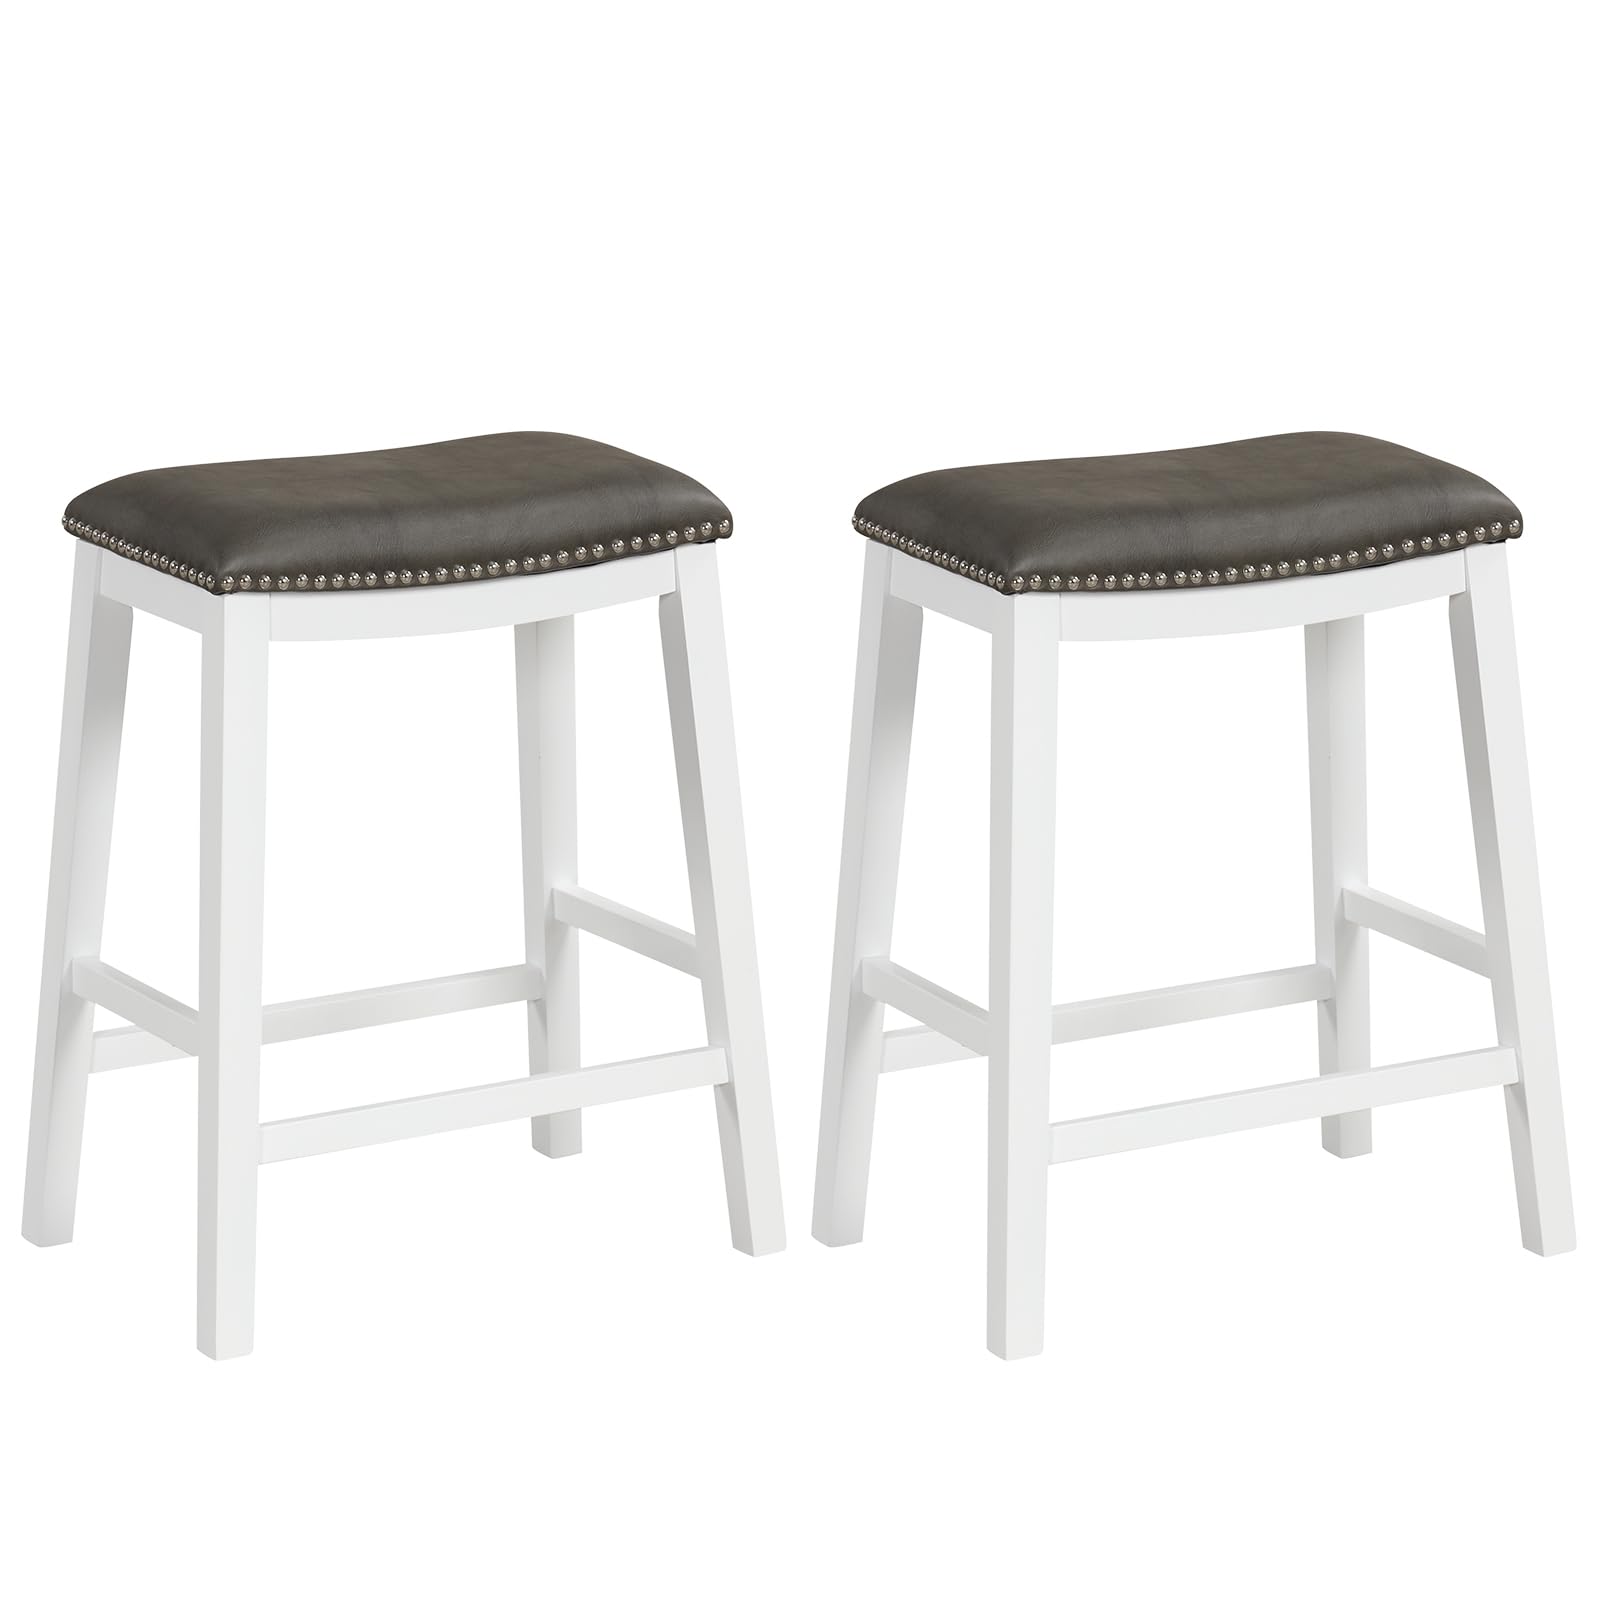 Giantex 26" Counter Height Bar Stools Set of 2, Faux PVC Leather Farmhouse Barstools w/Padded Seat